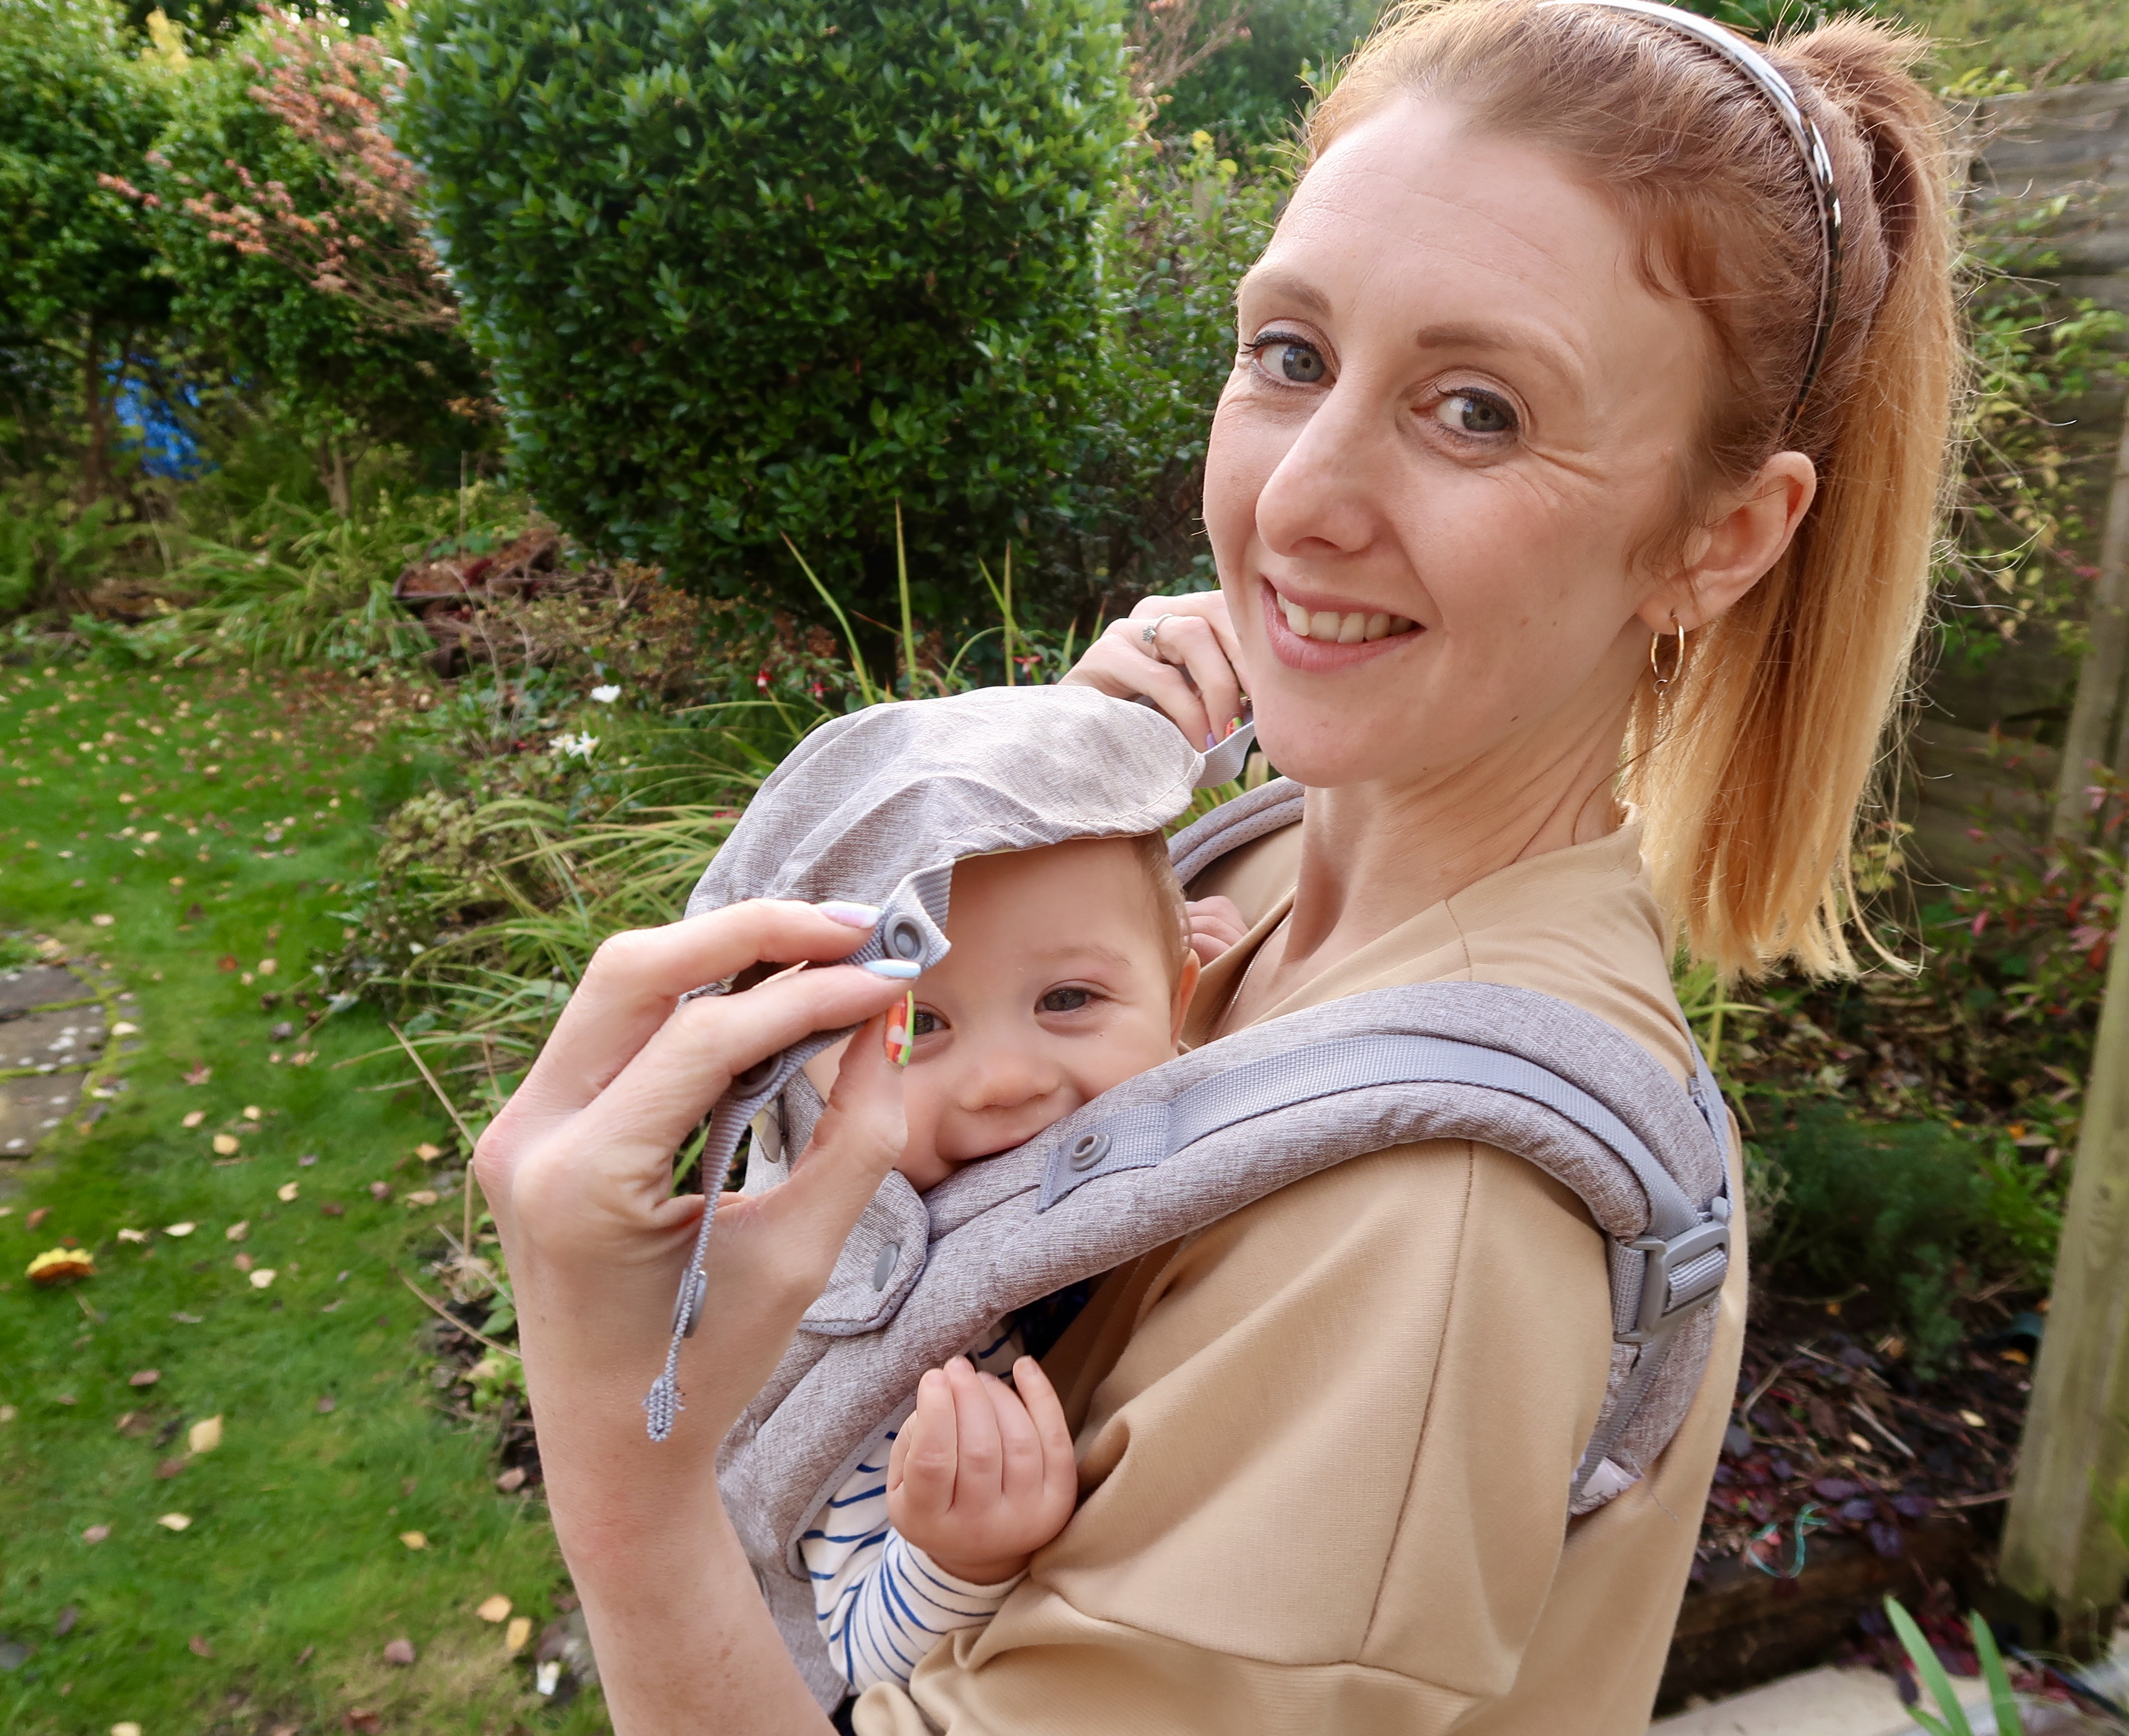 Lictin Baby Carrier REVIEW - Baby Wearing Made Easy!